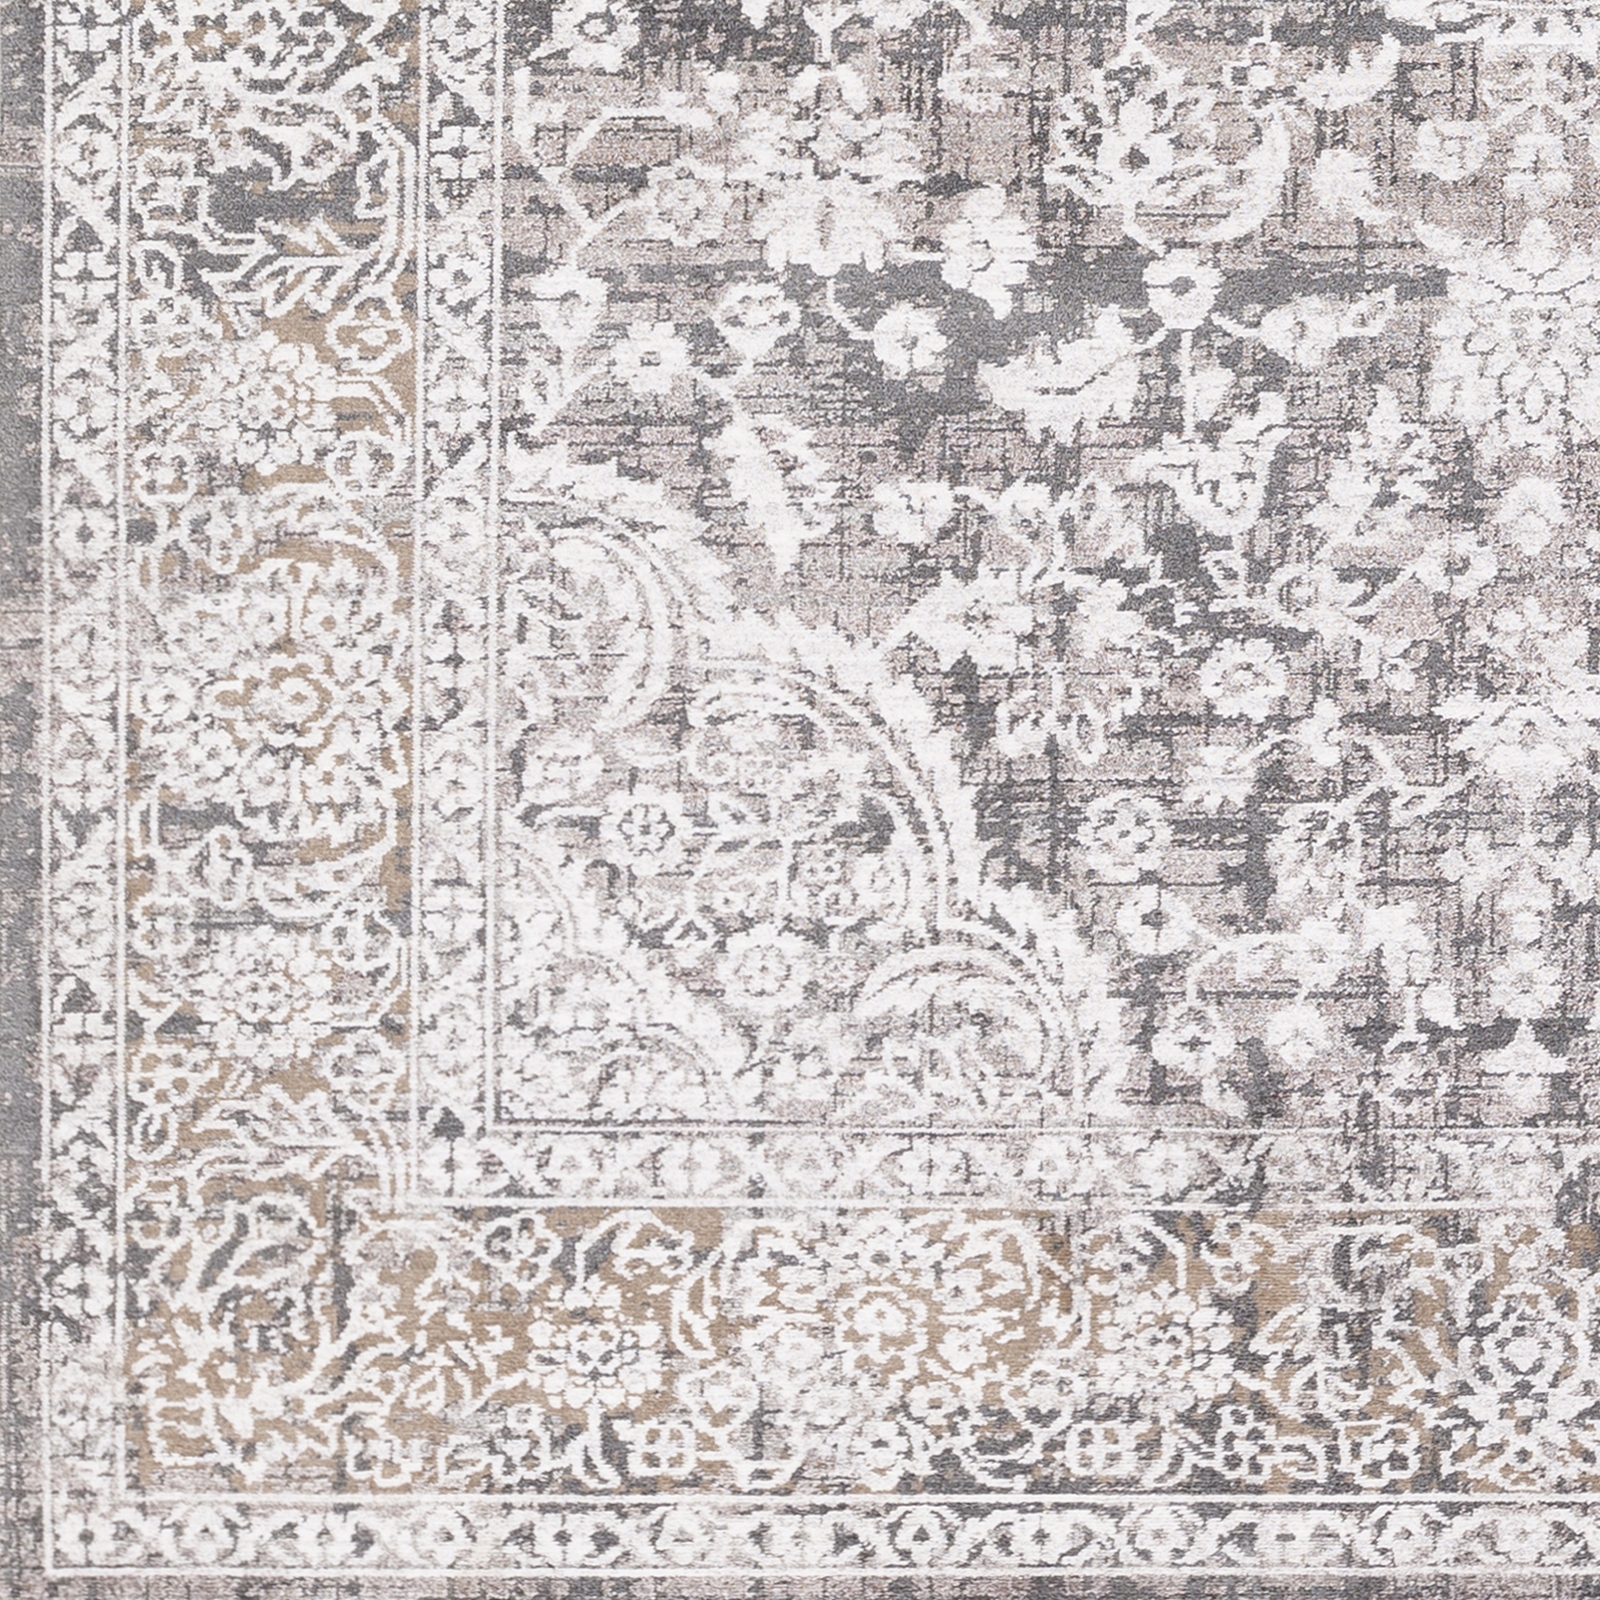 Couture Rug, 7'10" x 10'3" - Image 1